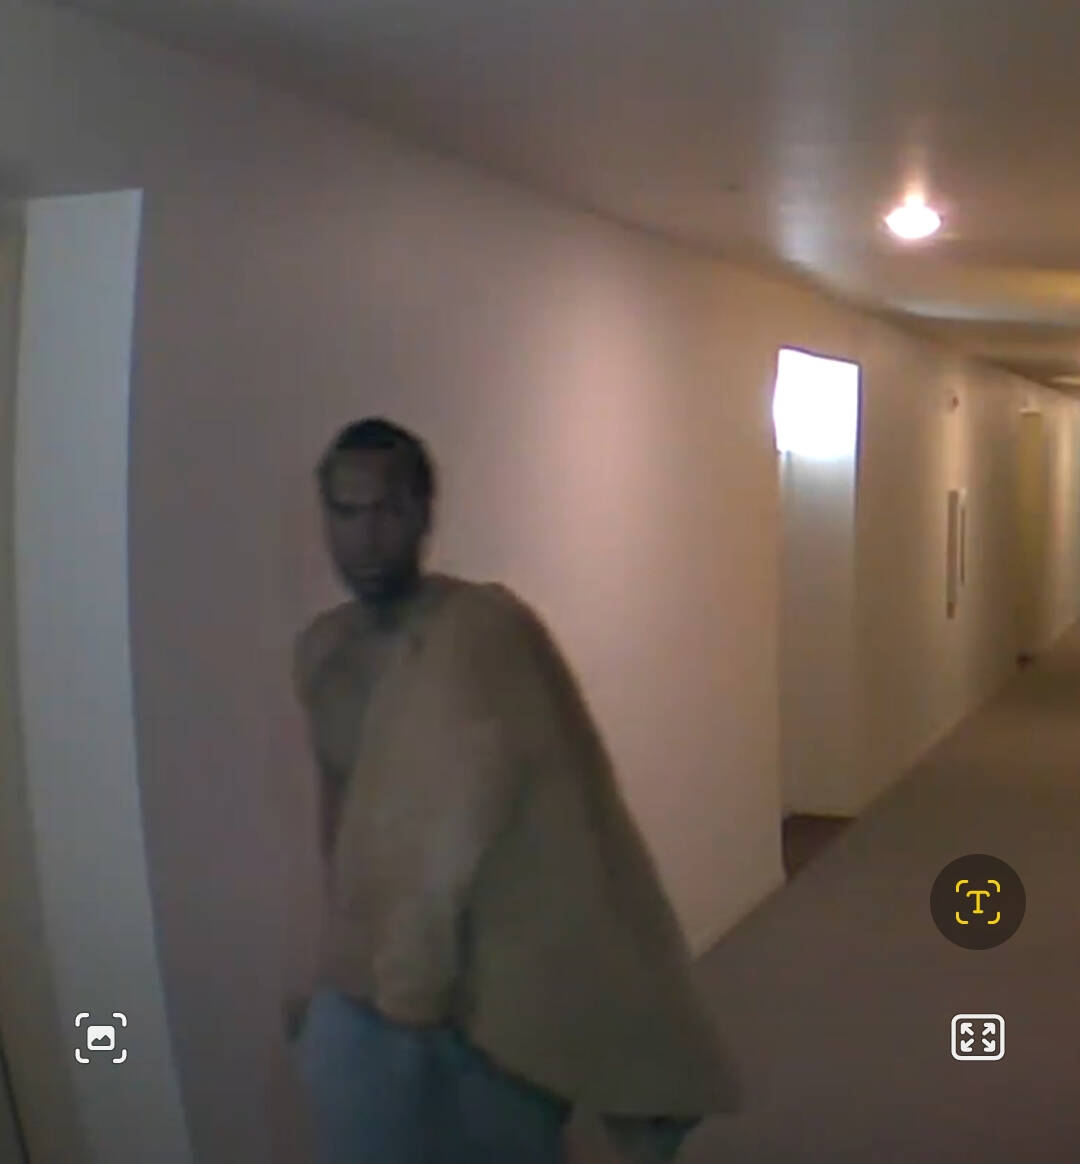 In an image captured from a door camera video, a man is pictured who later that day was seen naked in the elevator at Celebration apartments. Photo provided by SHAG resident Frank Fields